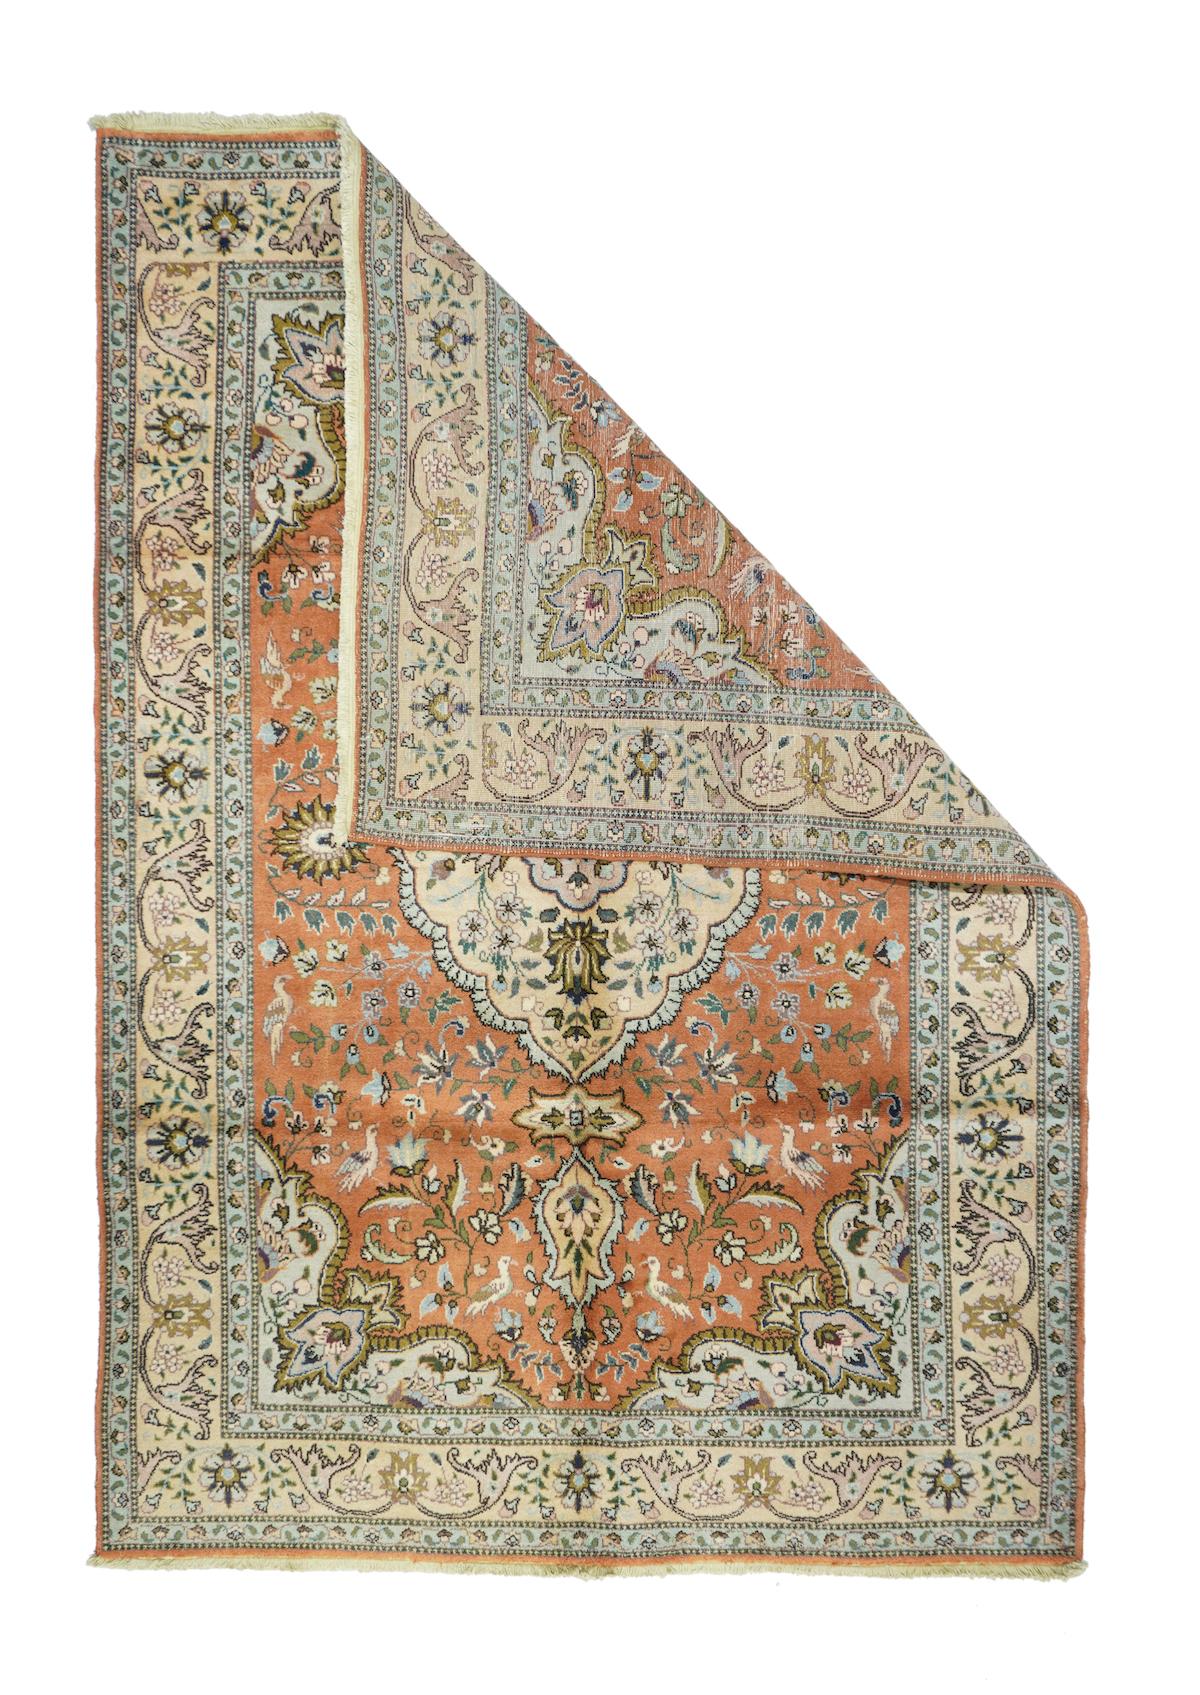 Vintage Tabriz Rug 6' x 8'9''. The Rose-Peach field of this very well-woven NW Persian CIY scatter shows a lightly scalloped oval straw medallion with vase, cartouche and palmette pendants. cream corners with pale green oblique escutcheons, straw